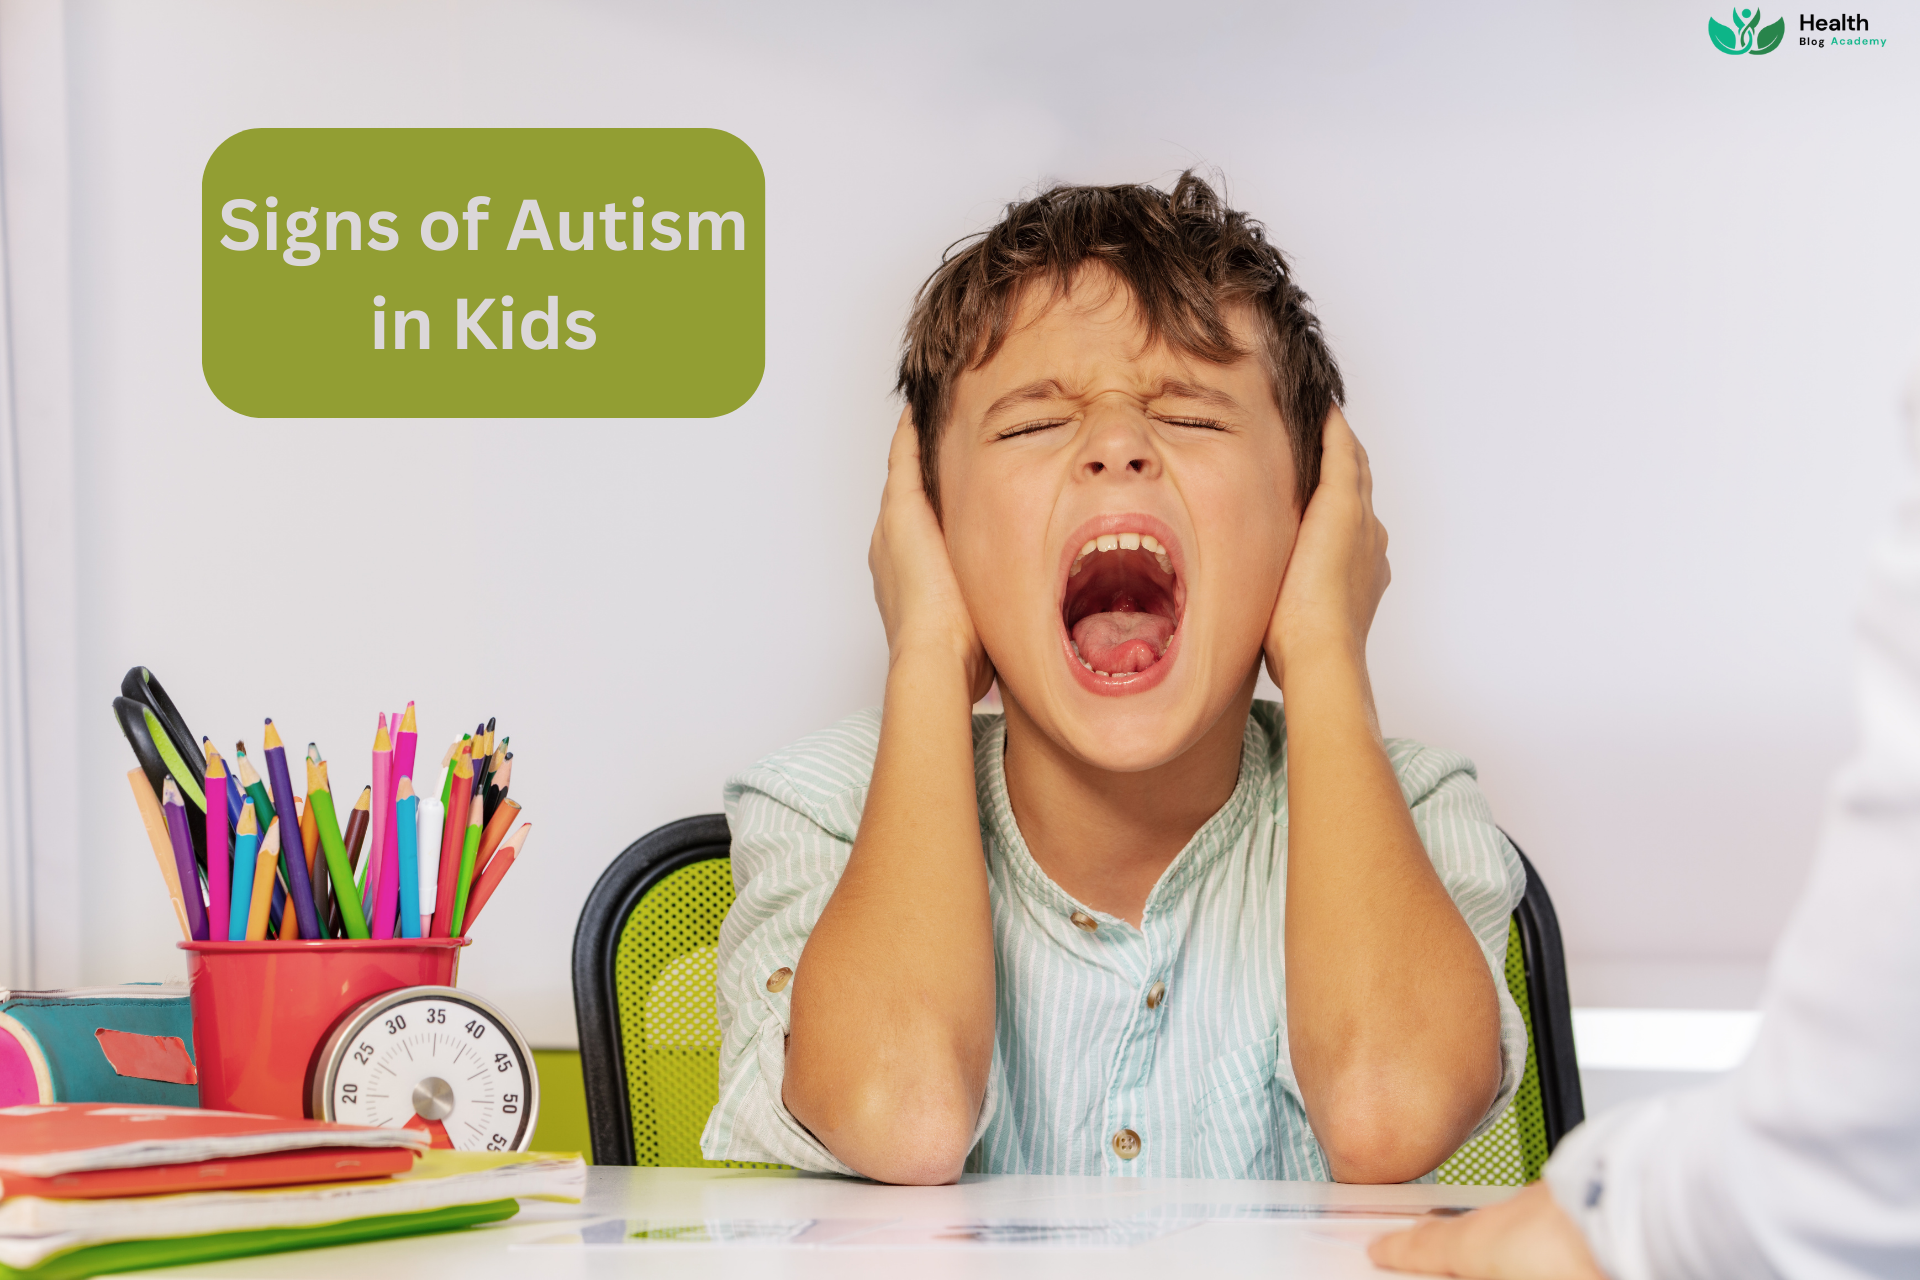 Signs of Autism in Kids